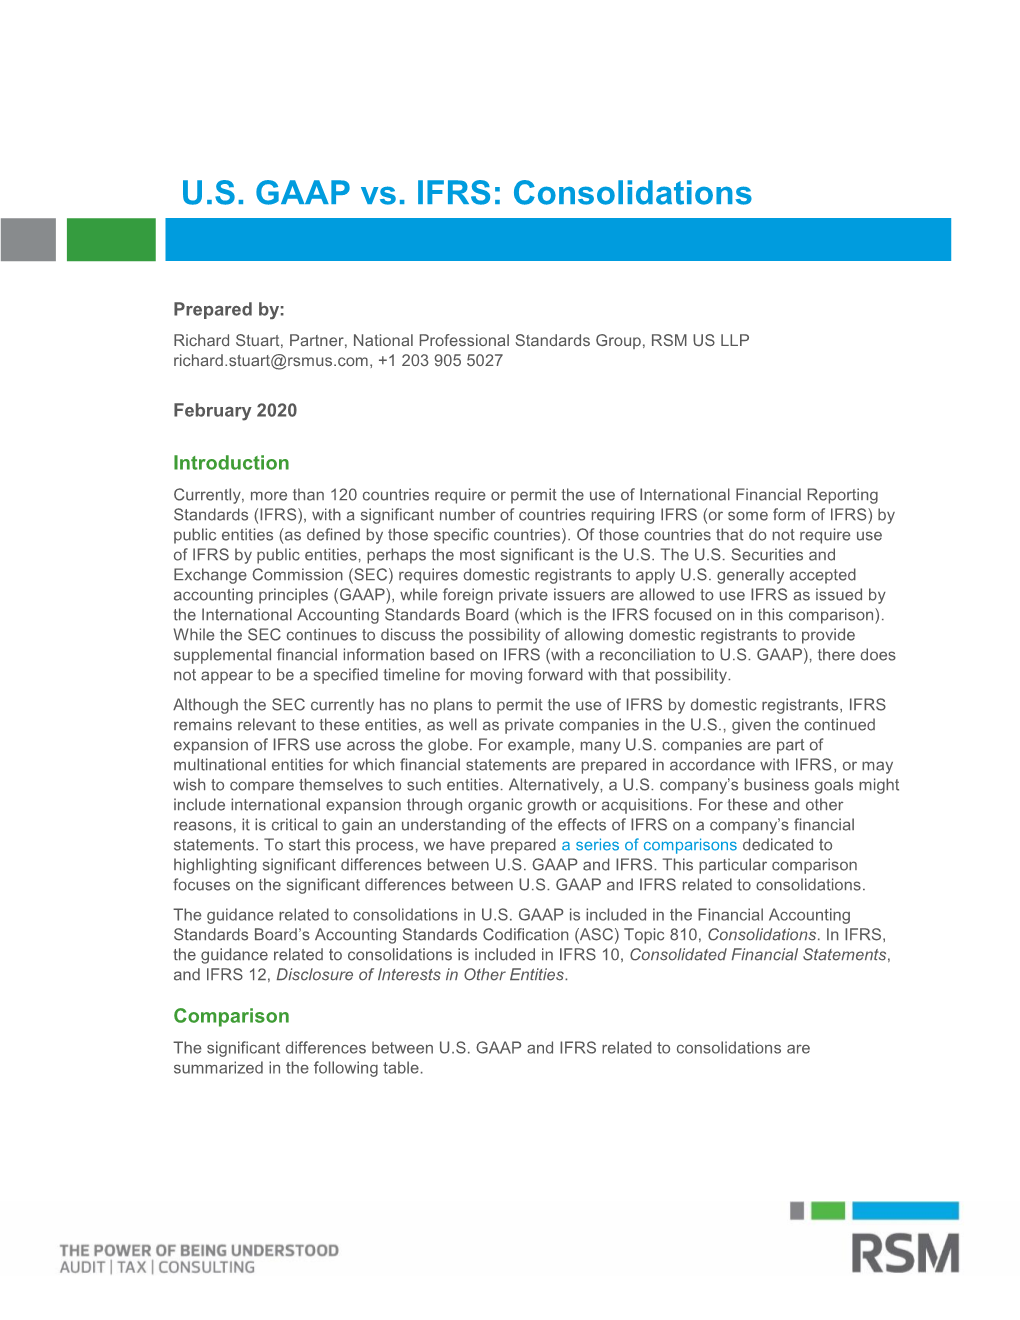 U.S. GAAP Vs. IFRS: Consolidations